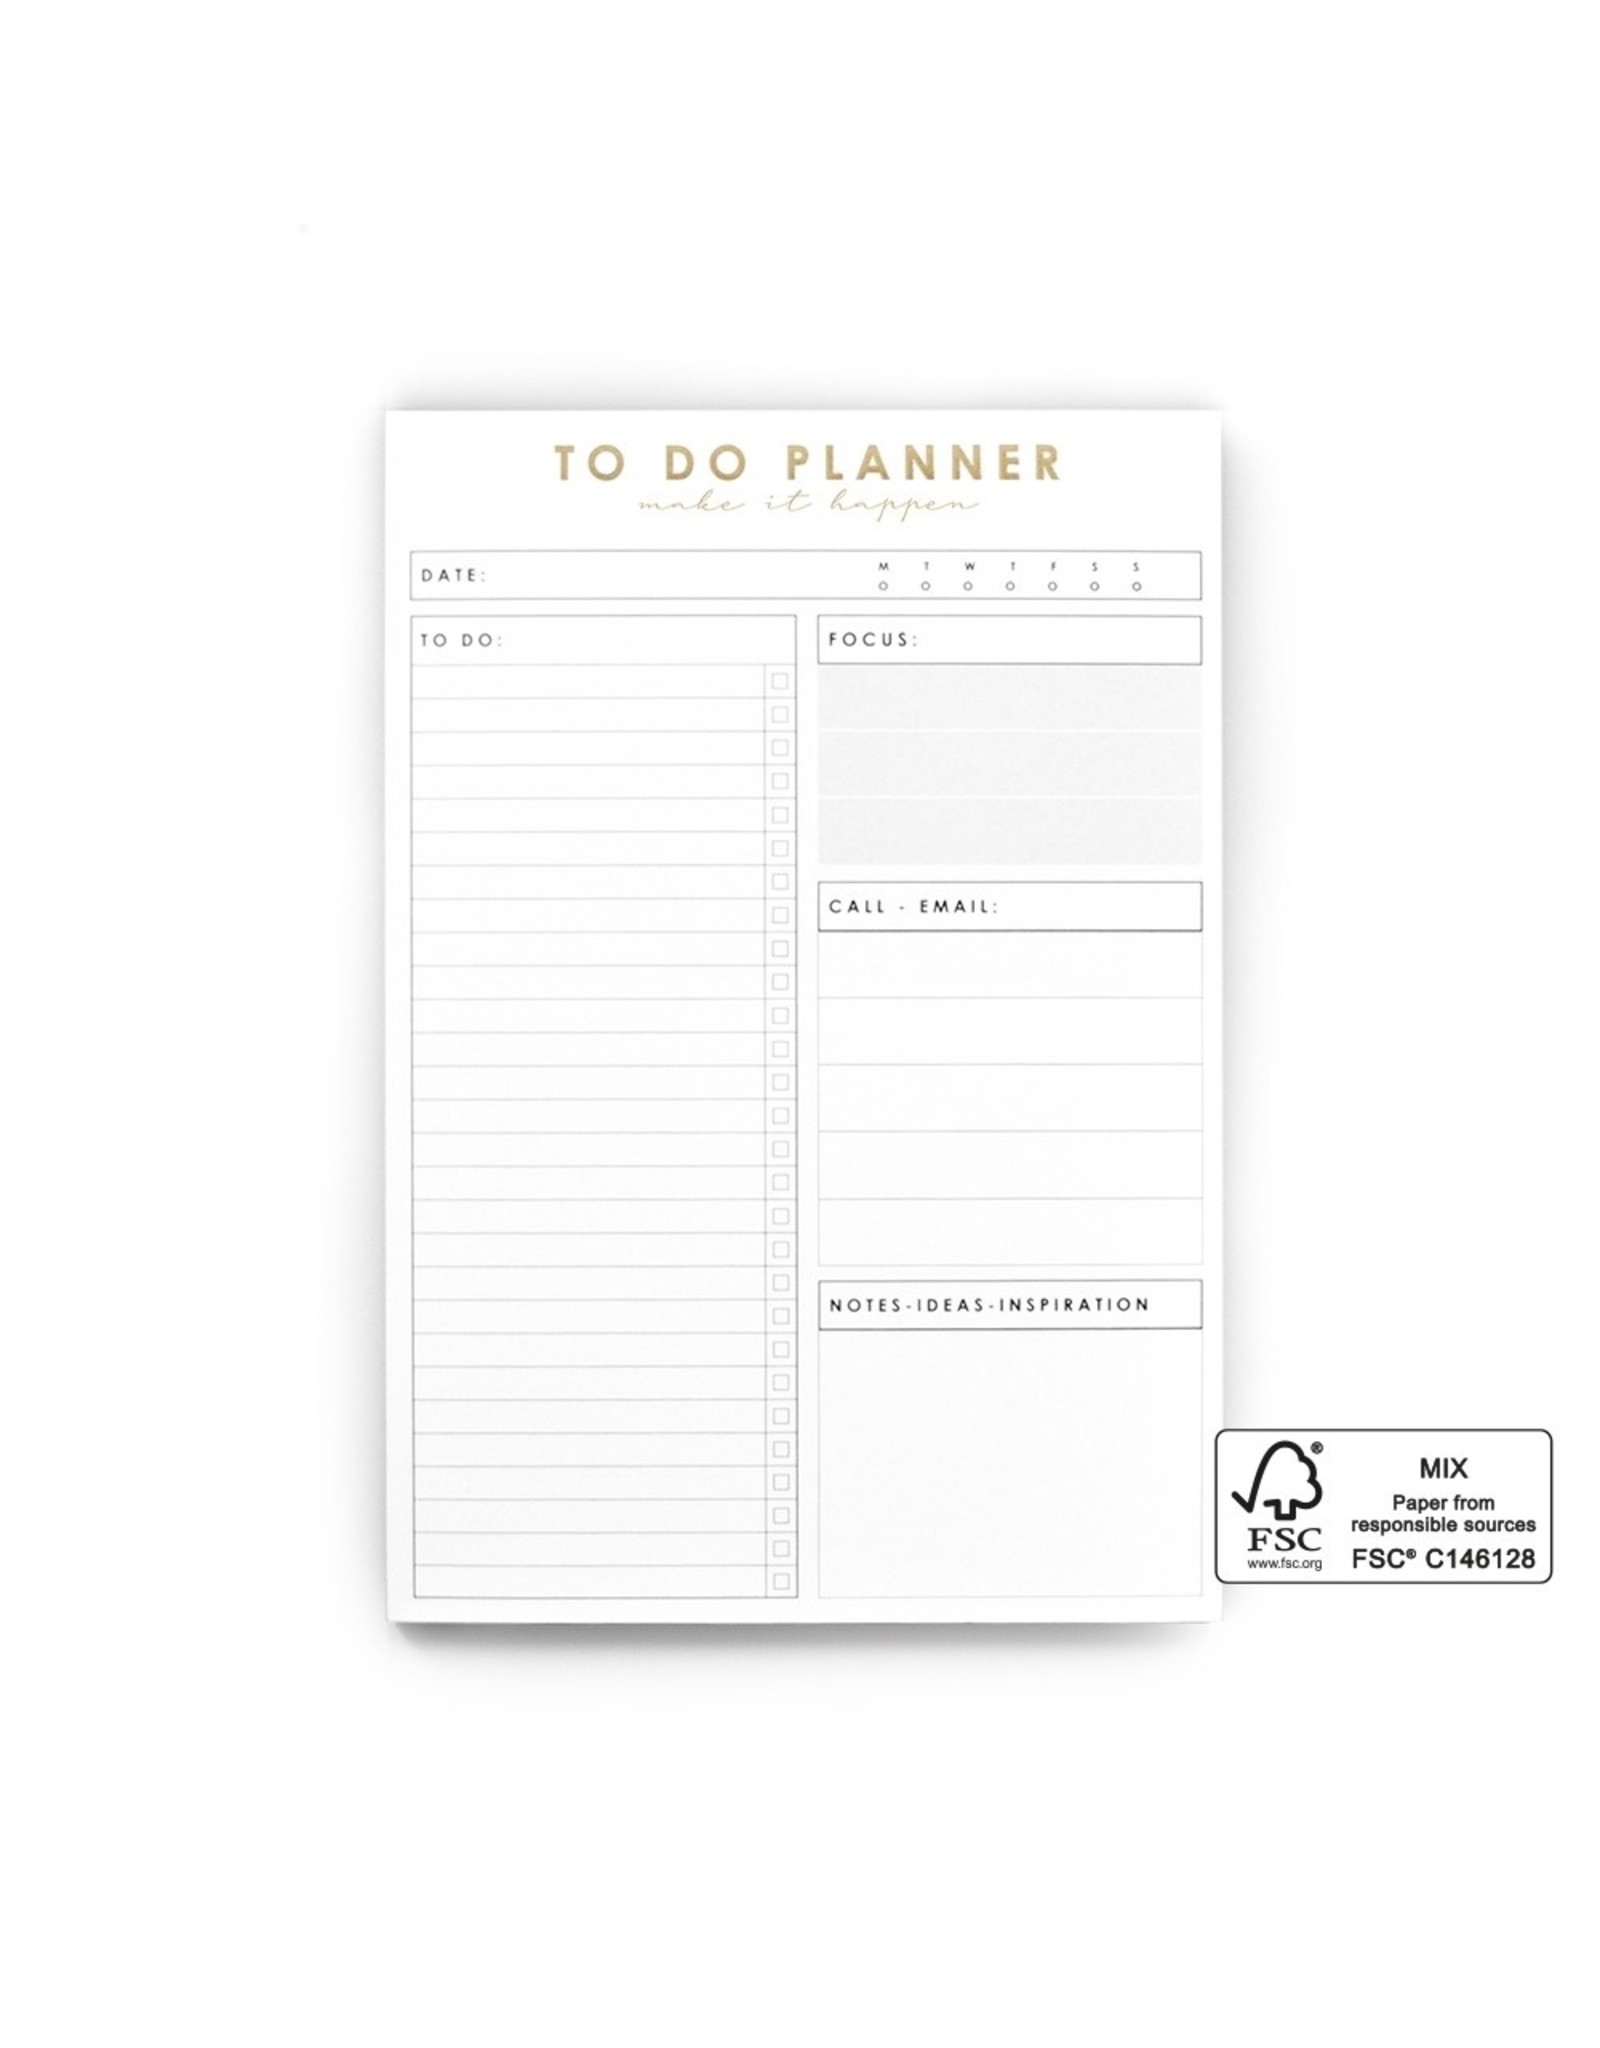 To do planner